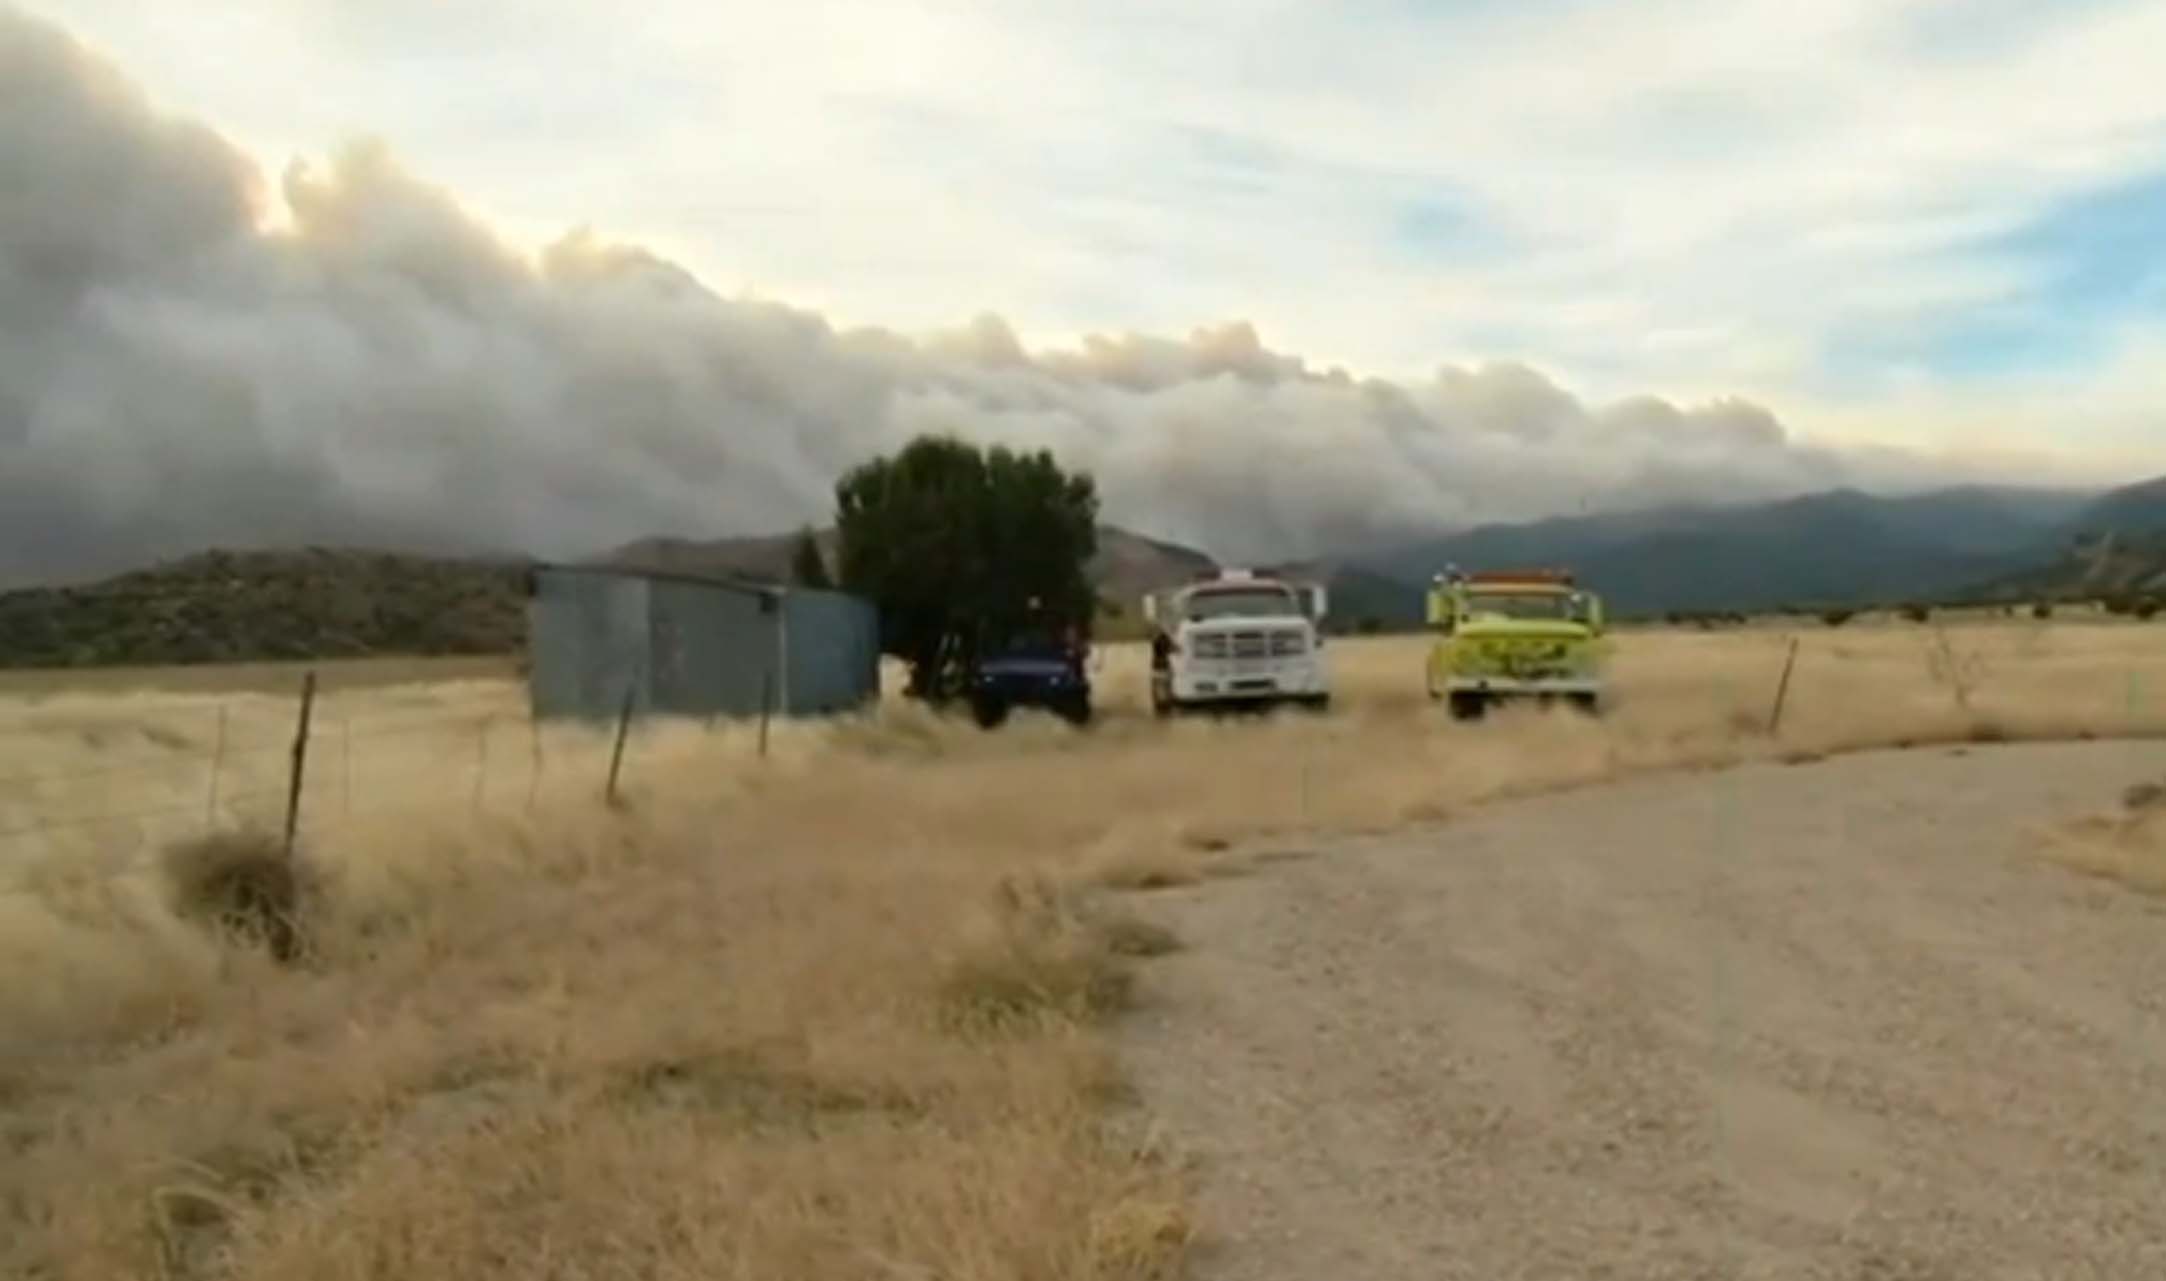 Colorado wildfire, spurred on by high winds, burns out of control.